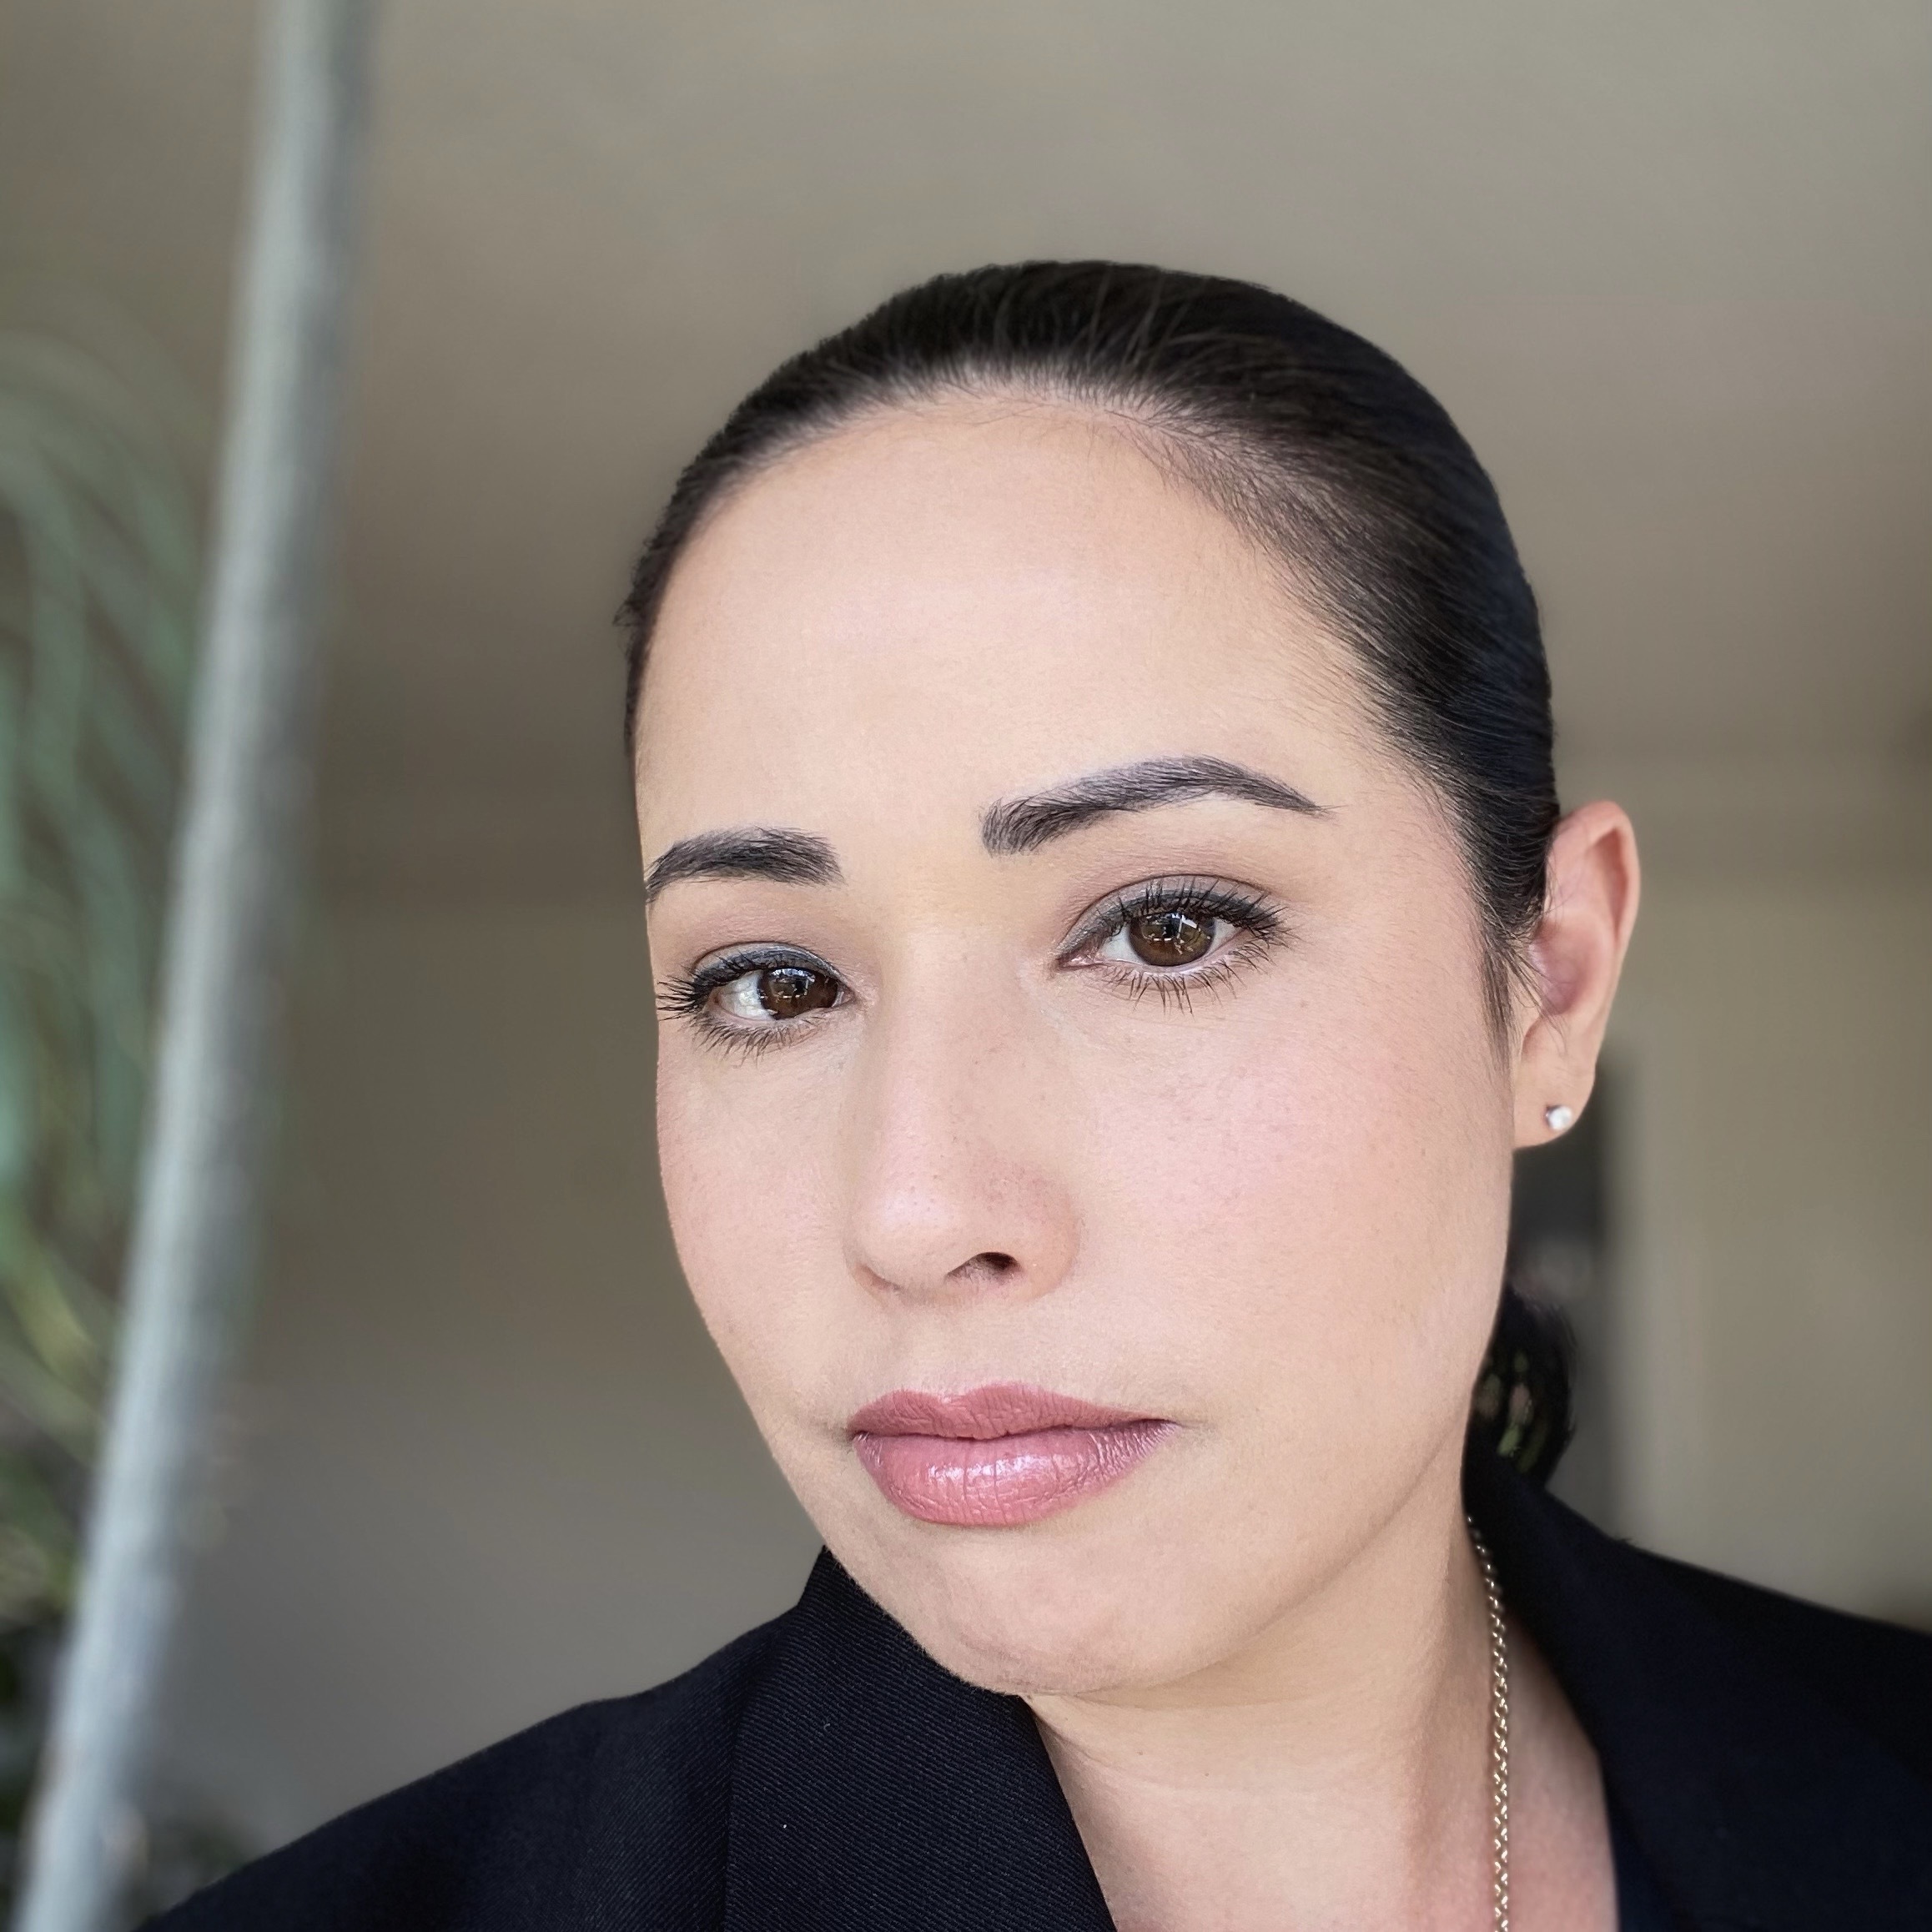 A woman with fair skin looks serenely at the camera, her pink lips gently pressed together. Her black hair is pulled back. Dark eyebrows arch over her deep brown eyes. She wears a black jacket with a silver chain and earrings. A tree and beige surroundings are visible in the background.